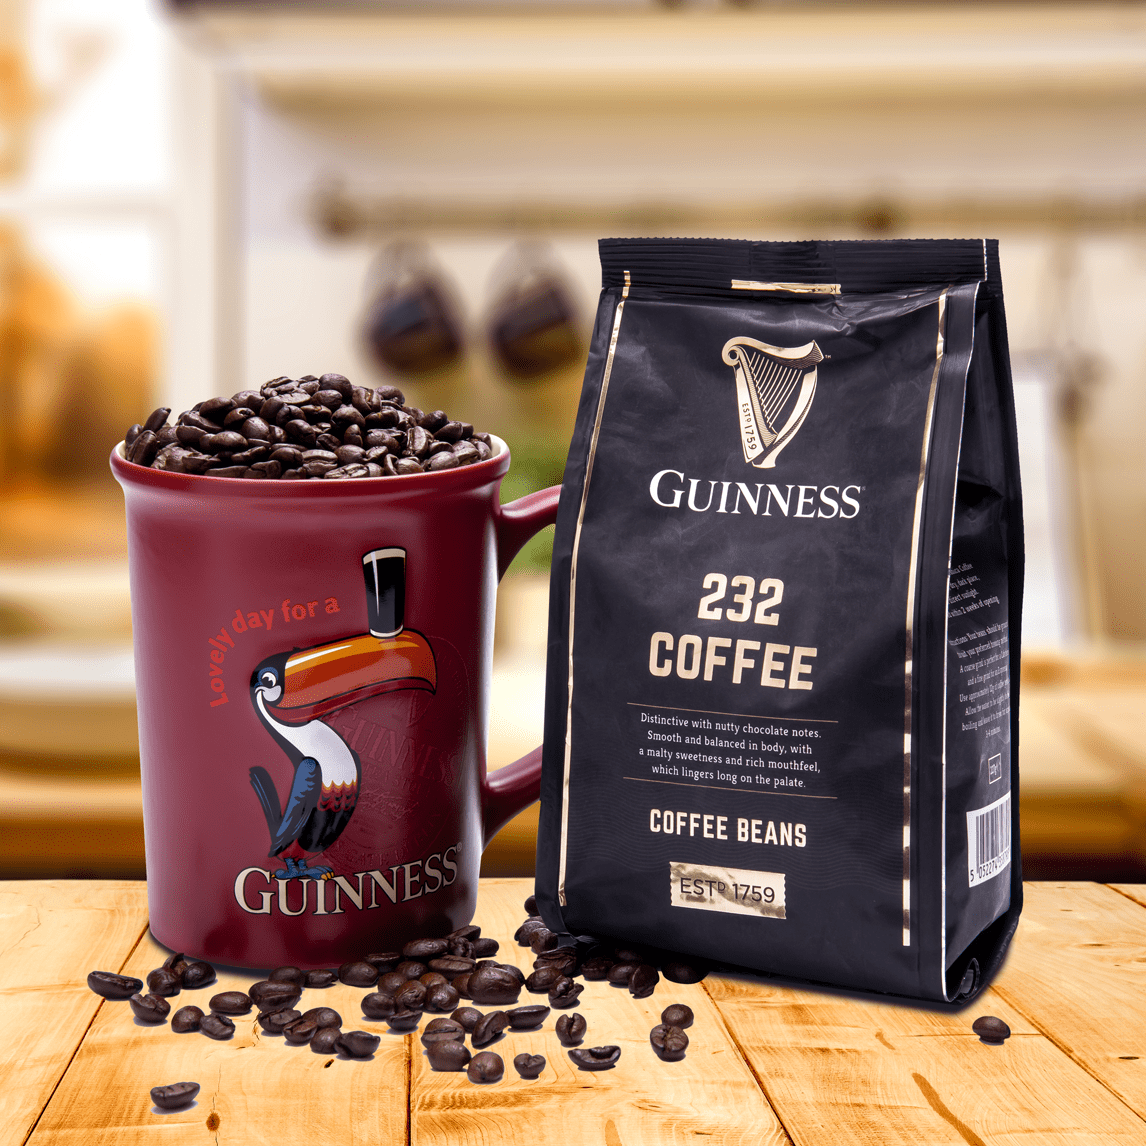 Guinness UK Guinness Toucan & Coffee Set with a bag of coffee beans.